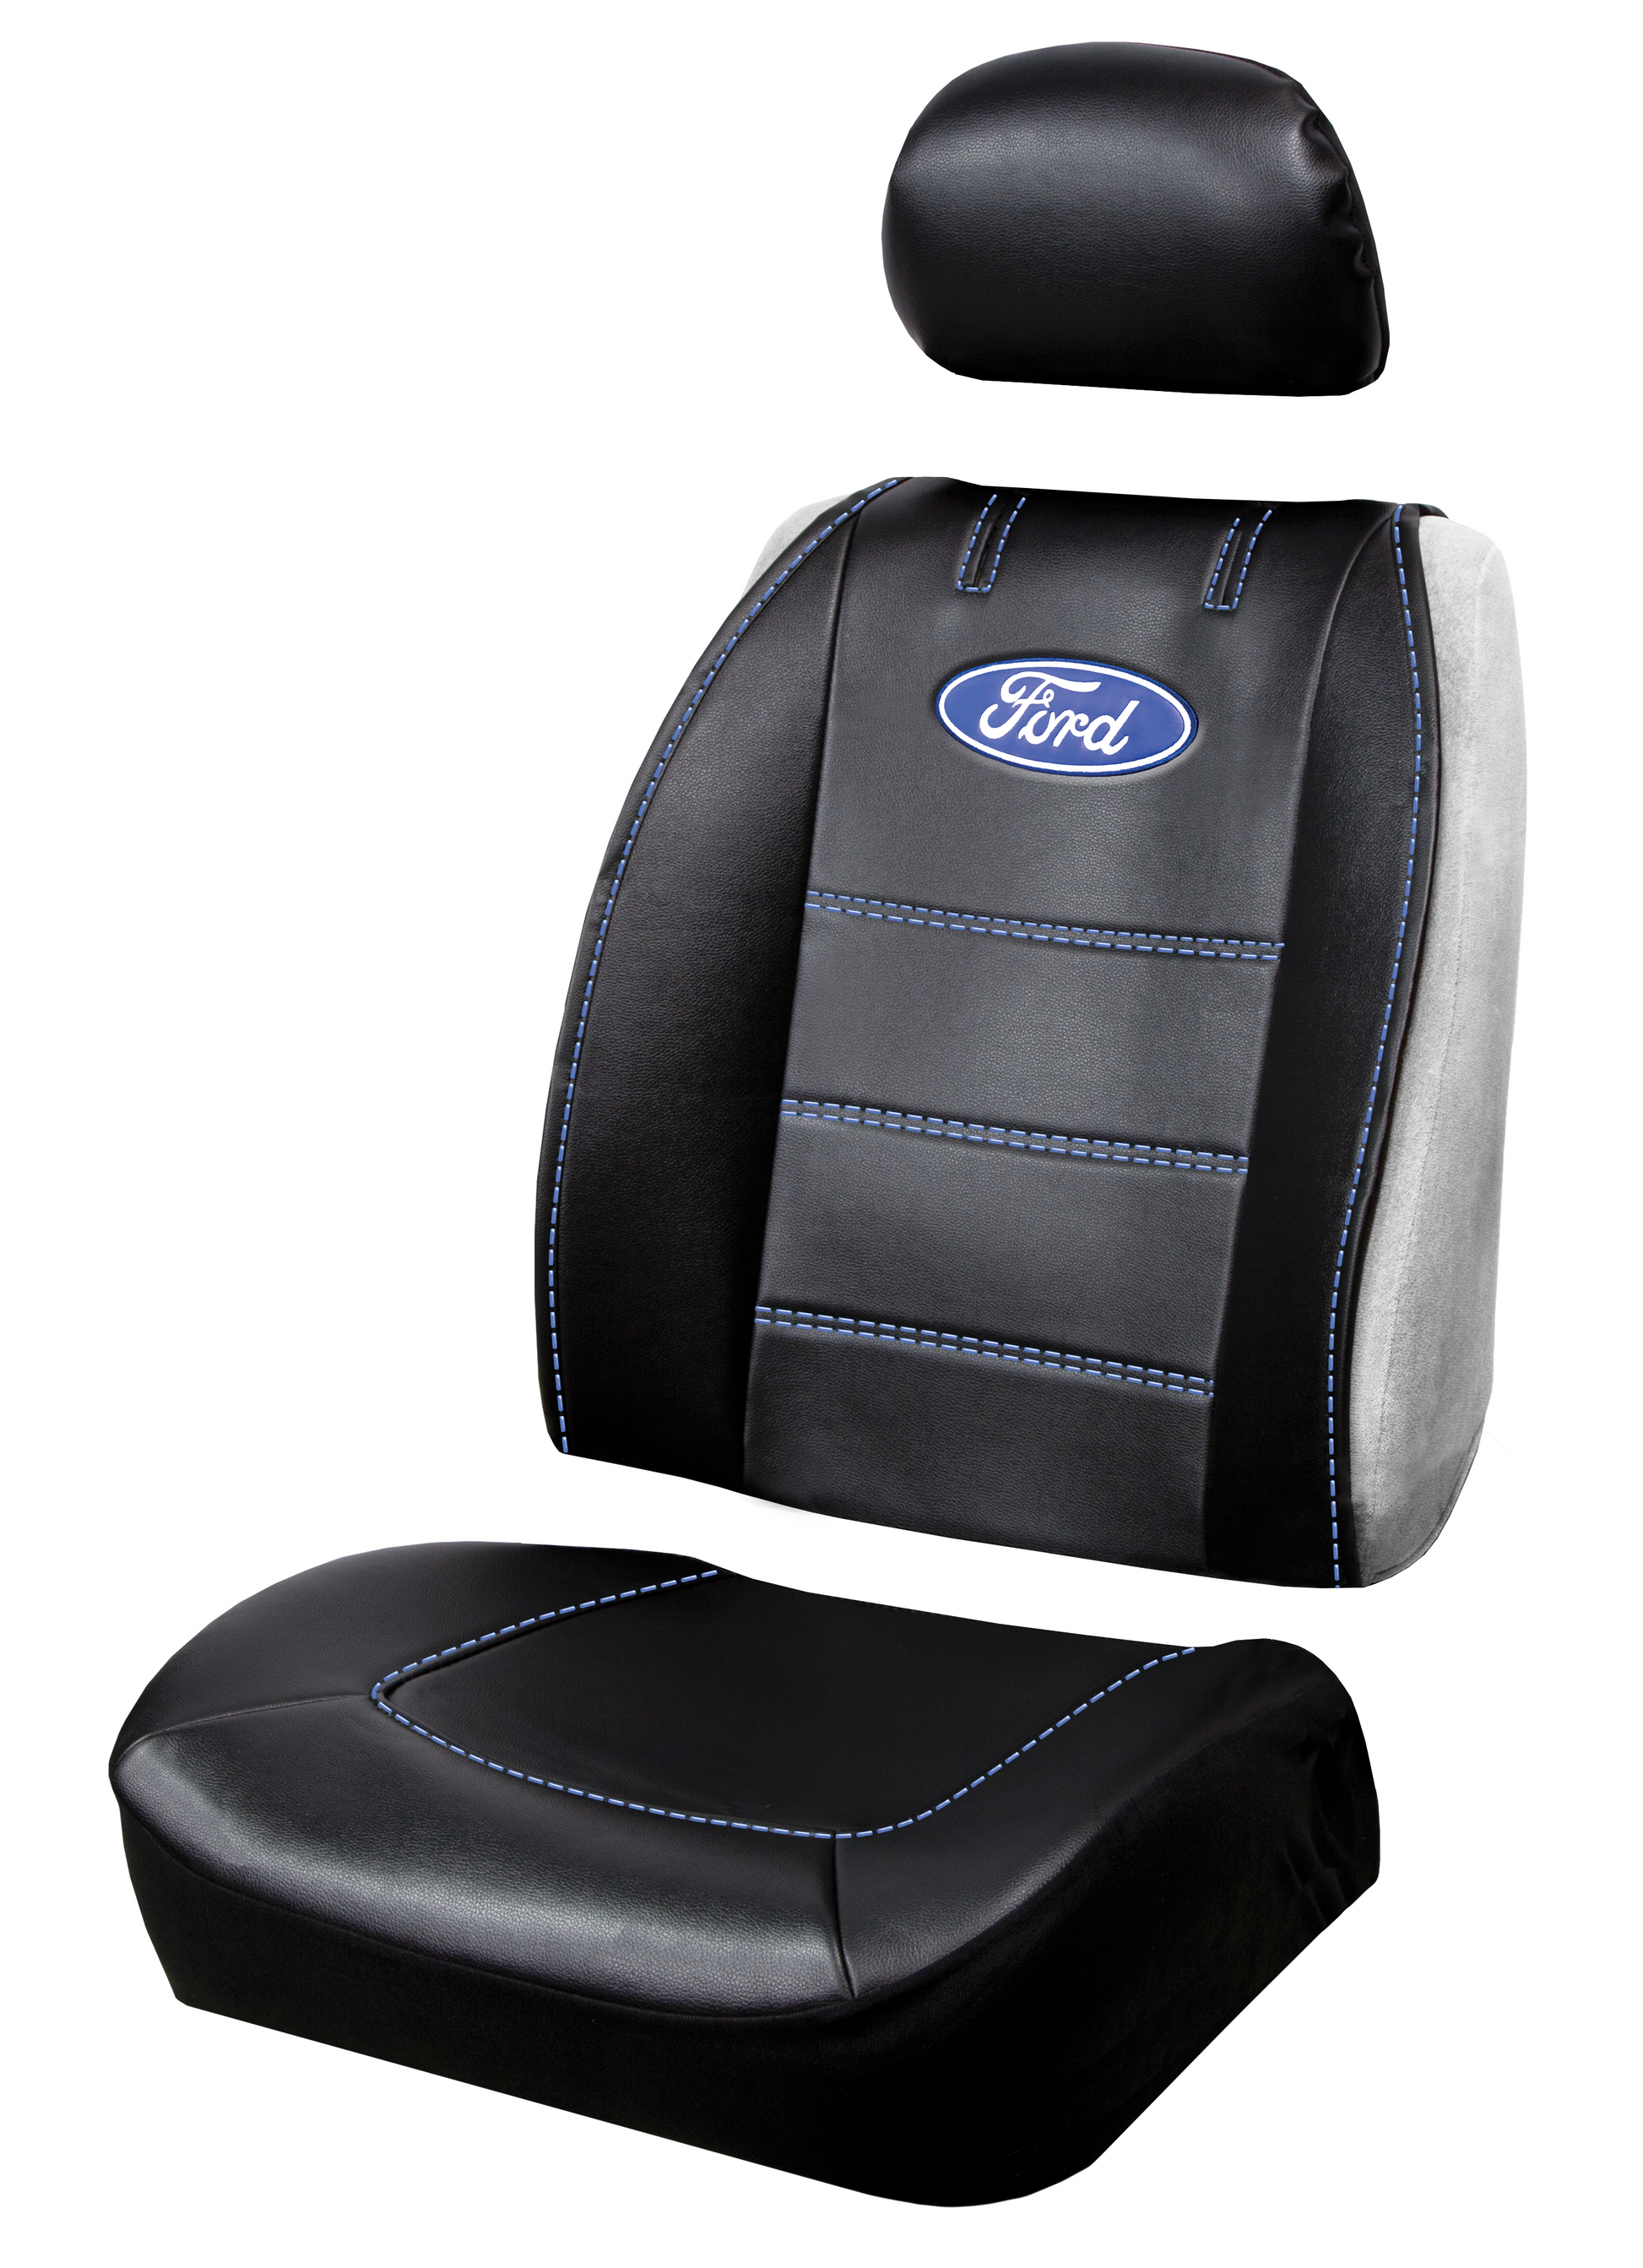 Pair of Plasticolor Premium 3 Piece Sideless Car Truck or SUV Seat Cover with Ford Logo and Cargo Pocket Compatible with Ford - Yupbizauto